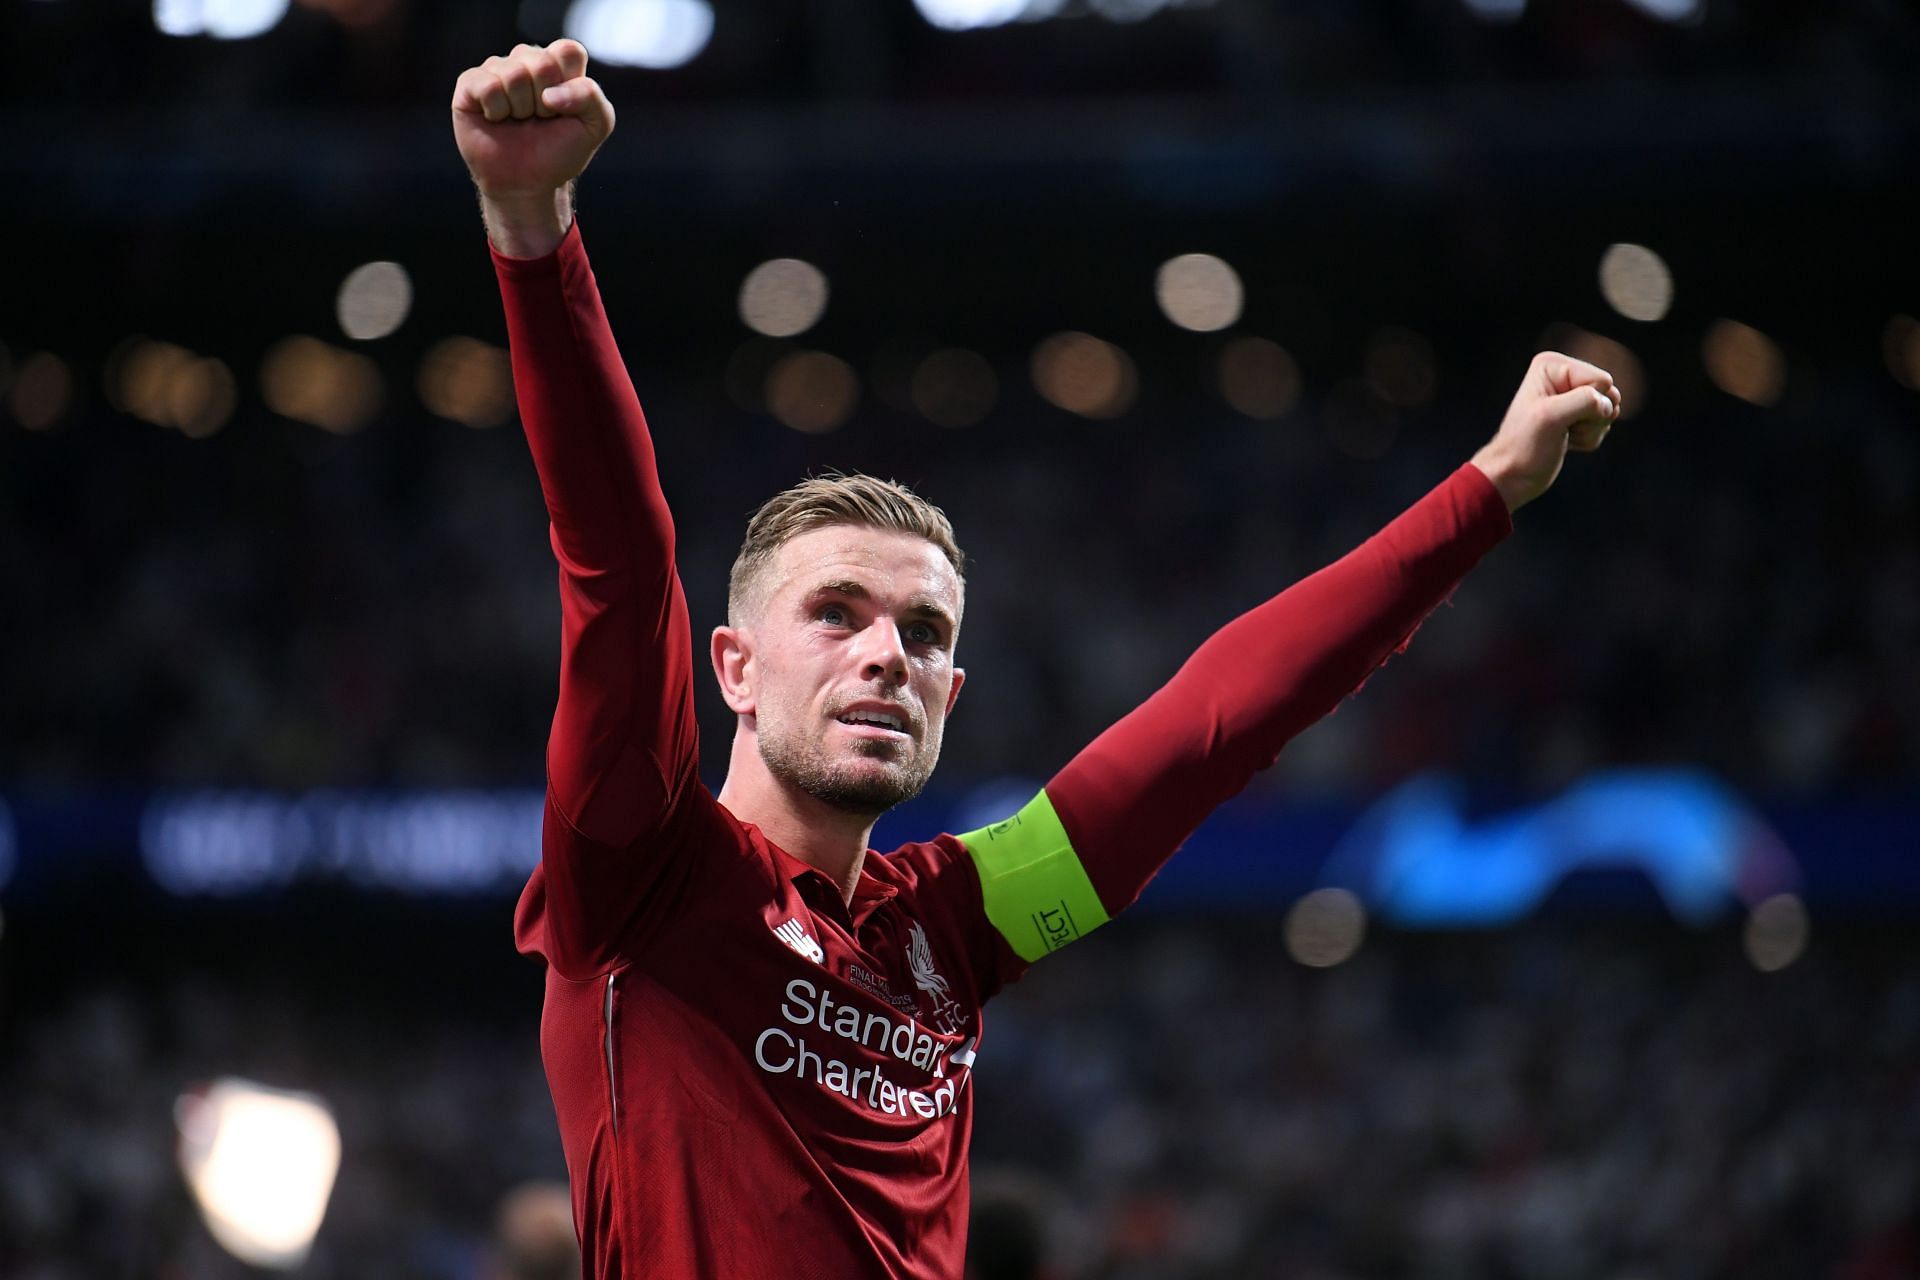 Liverpool captain Jordan Henderson is also dismayed by the decision